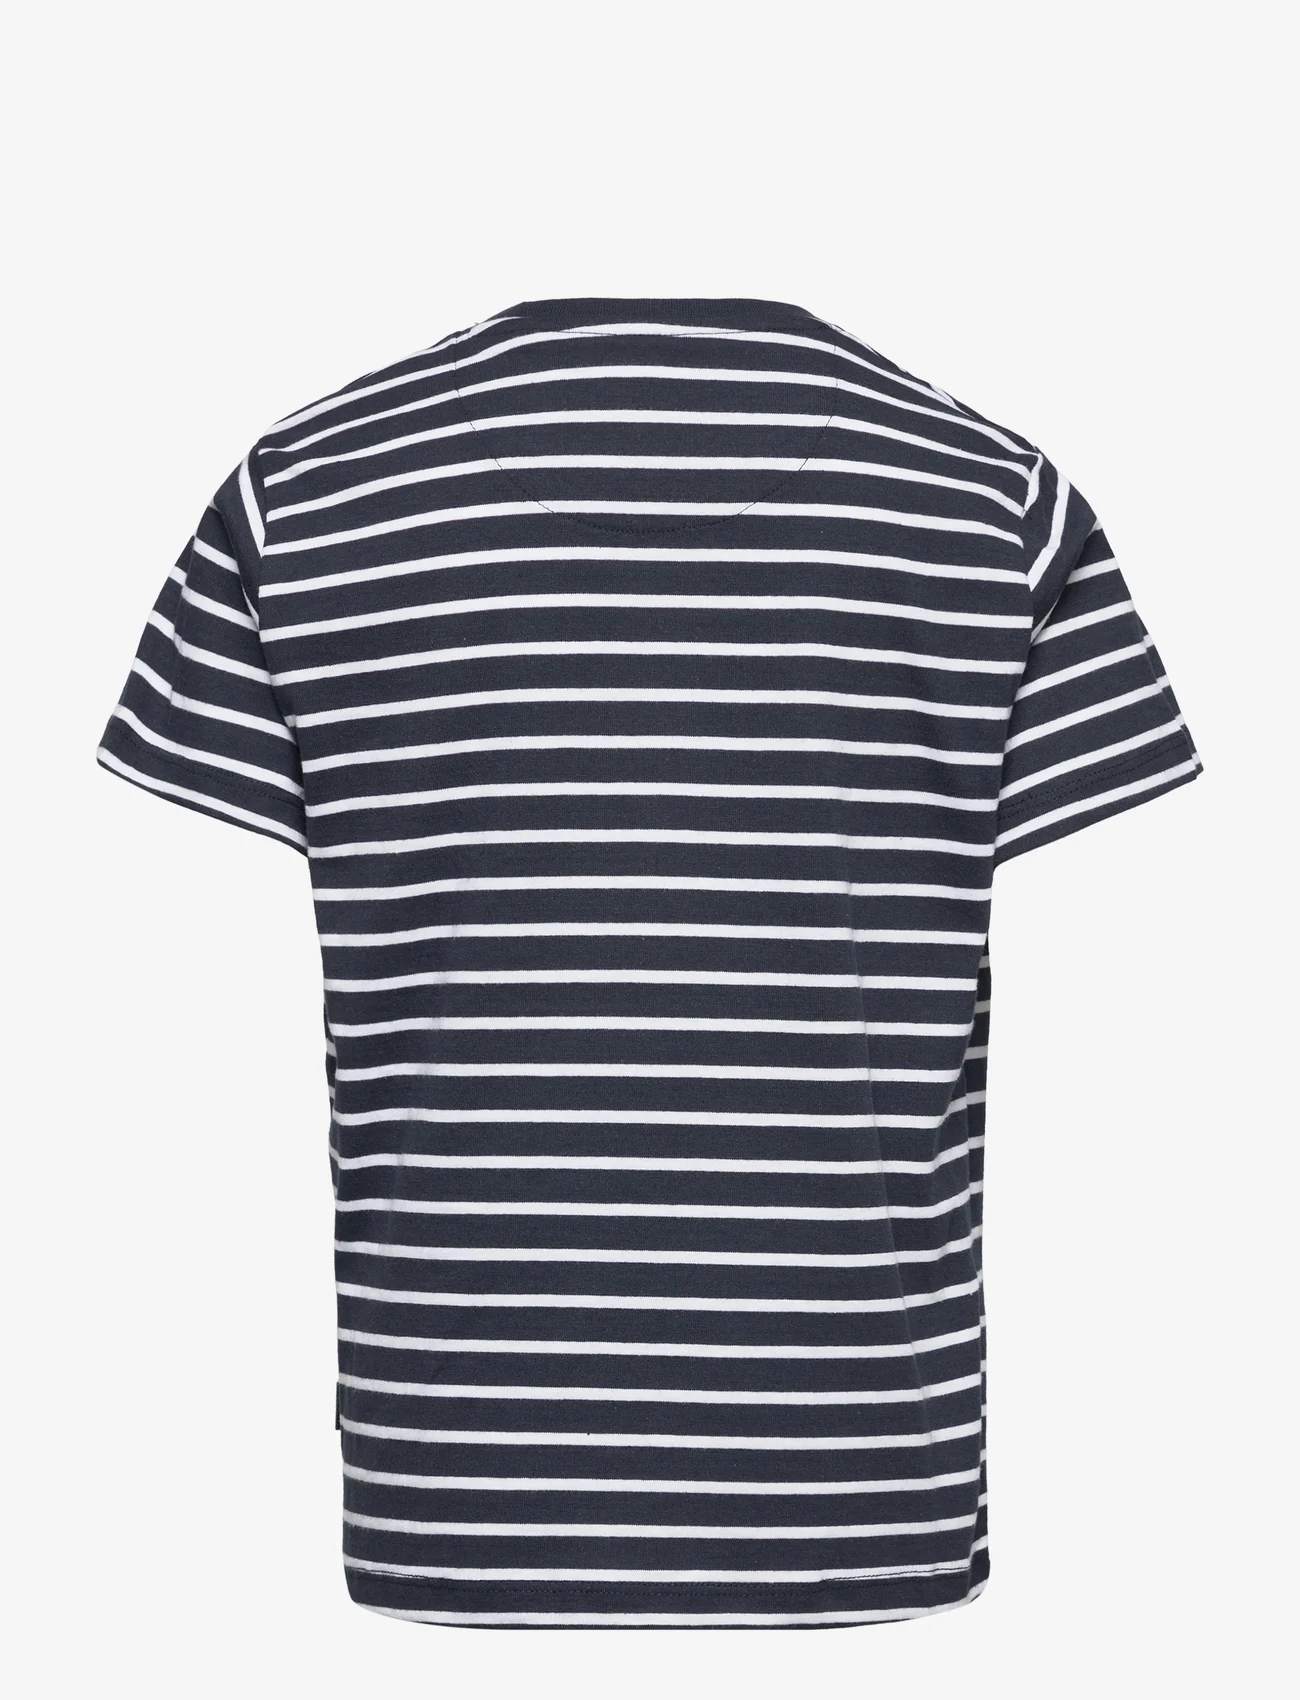 Kronstadt - Timmi Kids Organic/Recycled striped t-shirt - short-sleeved - navy / white - 1